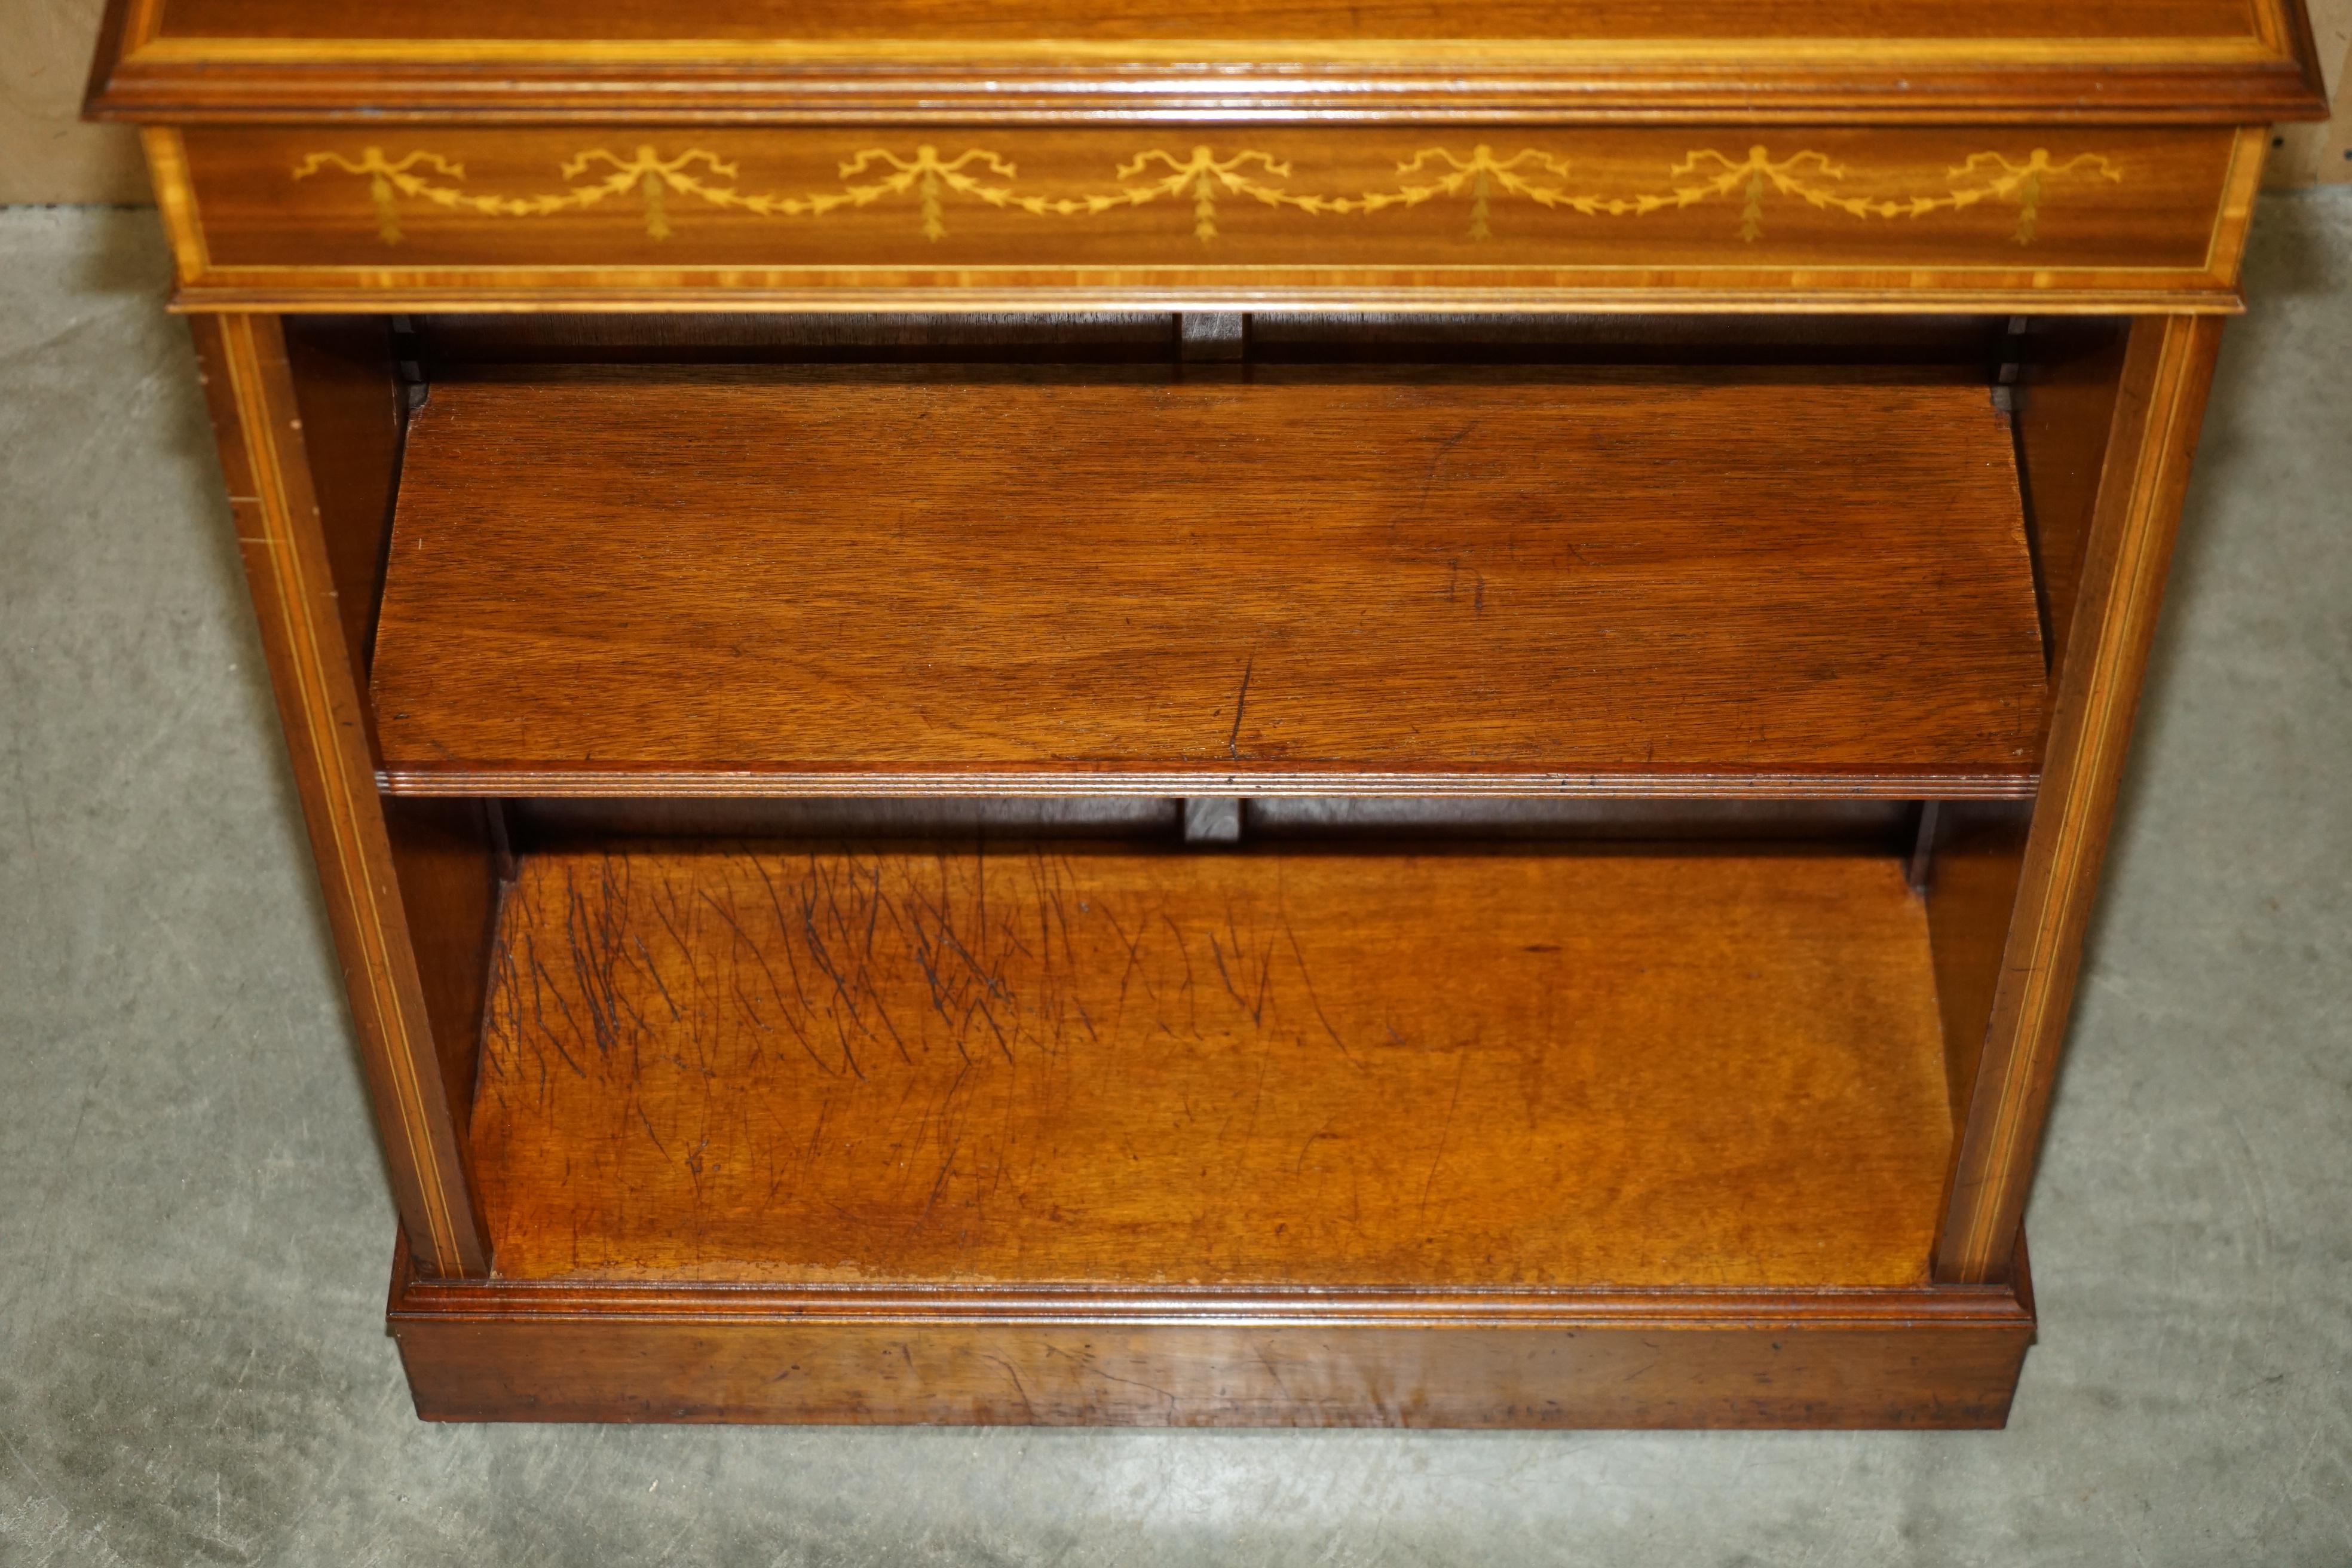 EXQUISITELY INLAID BRiGHTS OF NETTLEBED SHERATON REVIVAL DWARF OPEN BOOKCASE For Sale 9